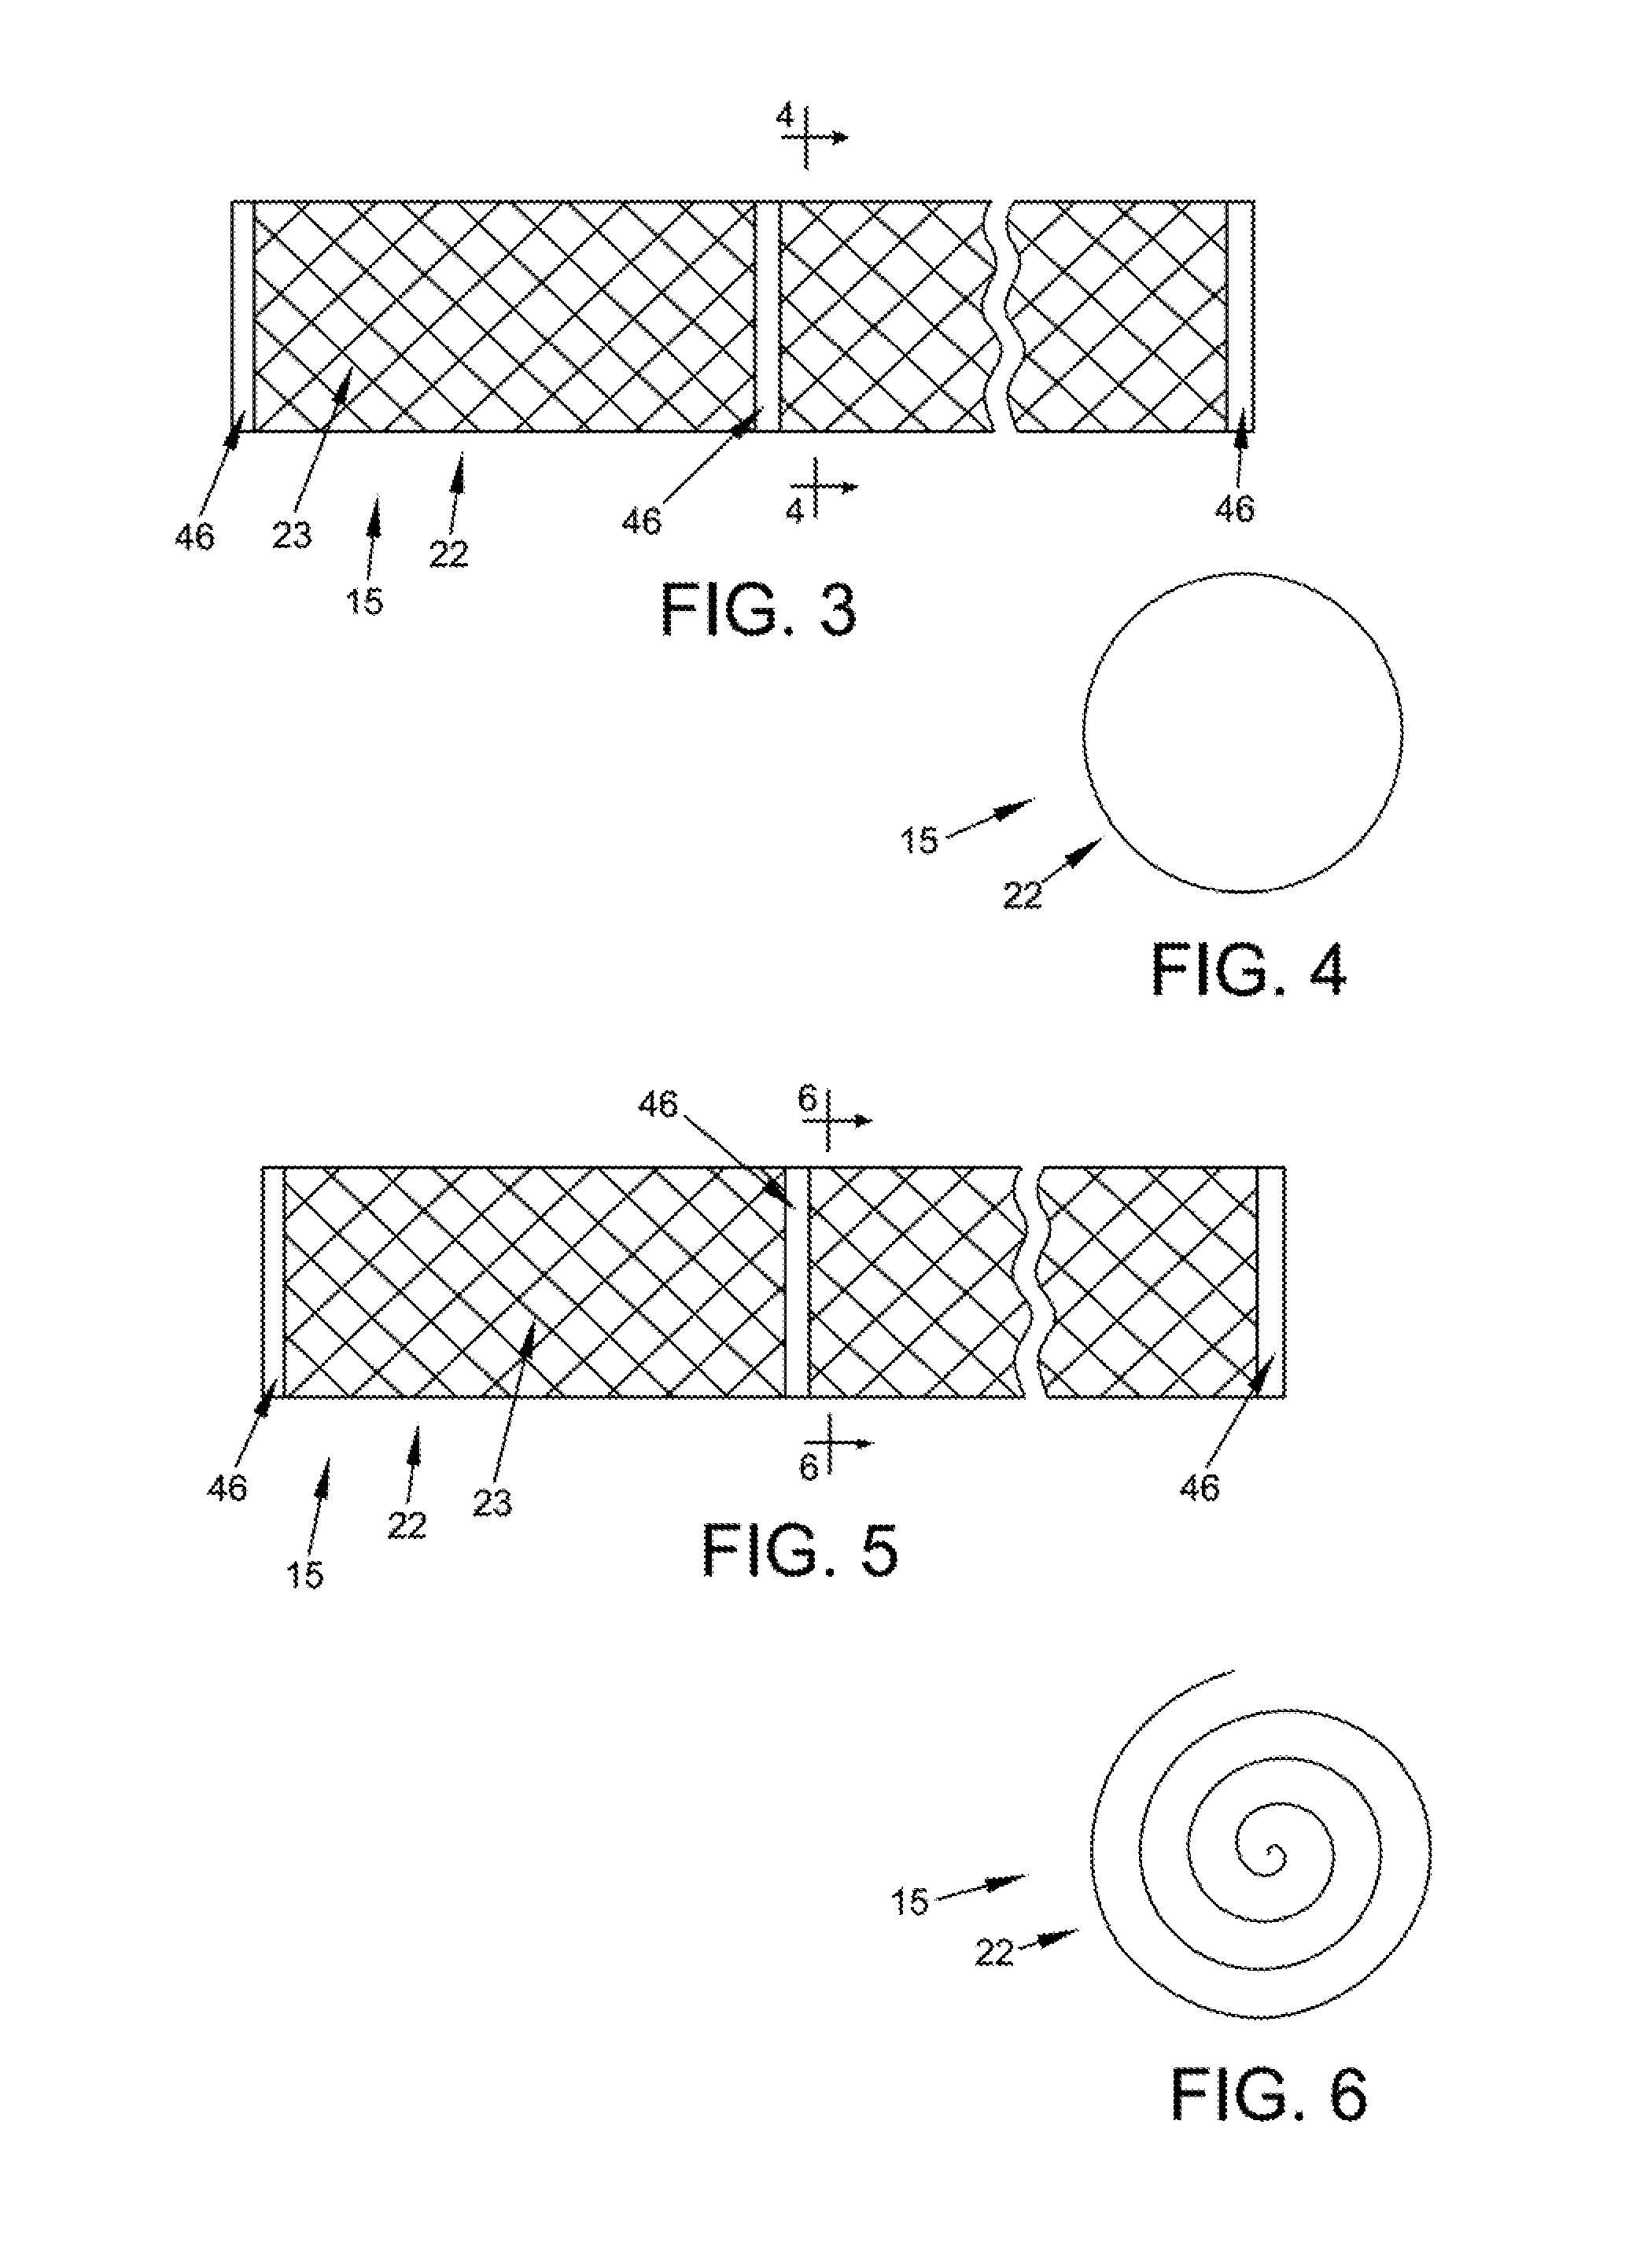 Method and apparatus for treating bone fractures, and/or for fortifying and/or augmenting bone, including the provision and use of composite implants